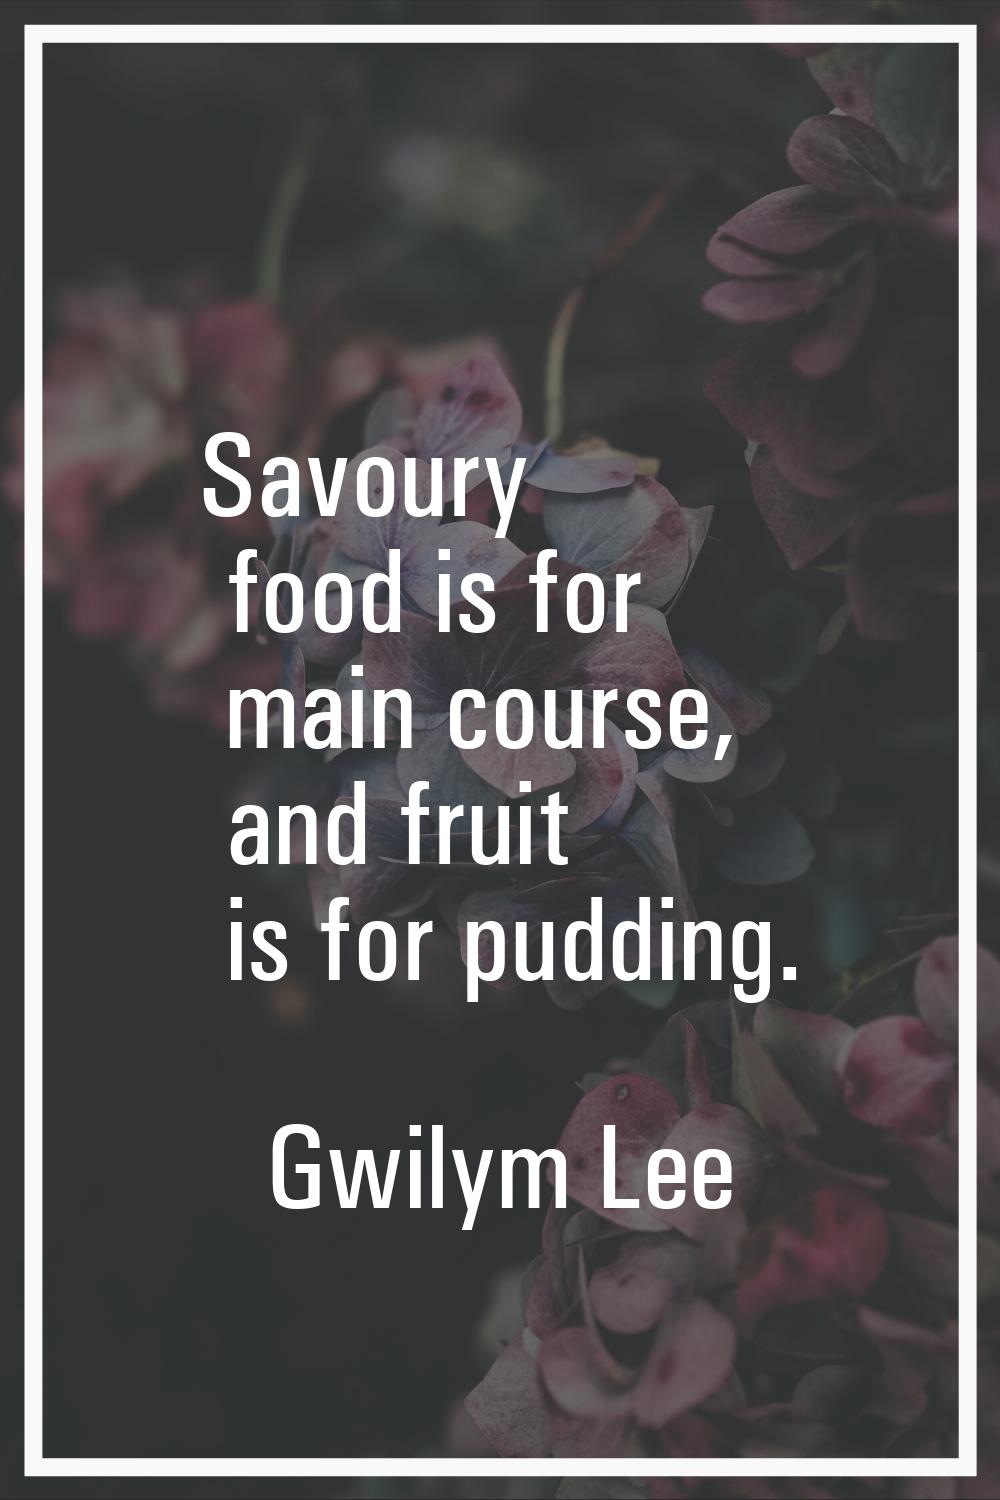 Savoury food is for main course, and fruit is for pudding.